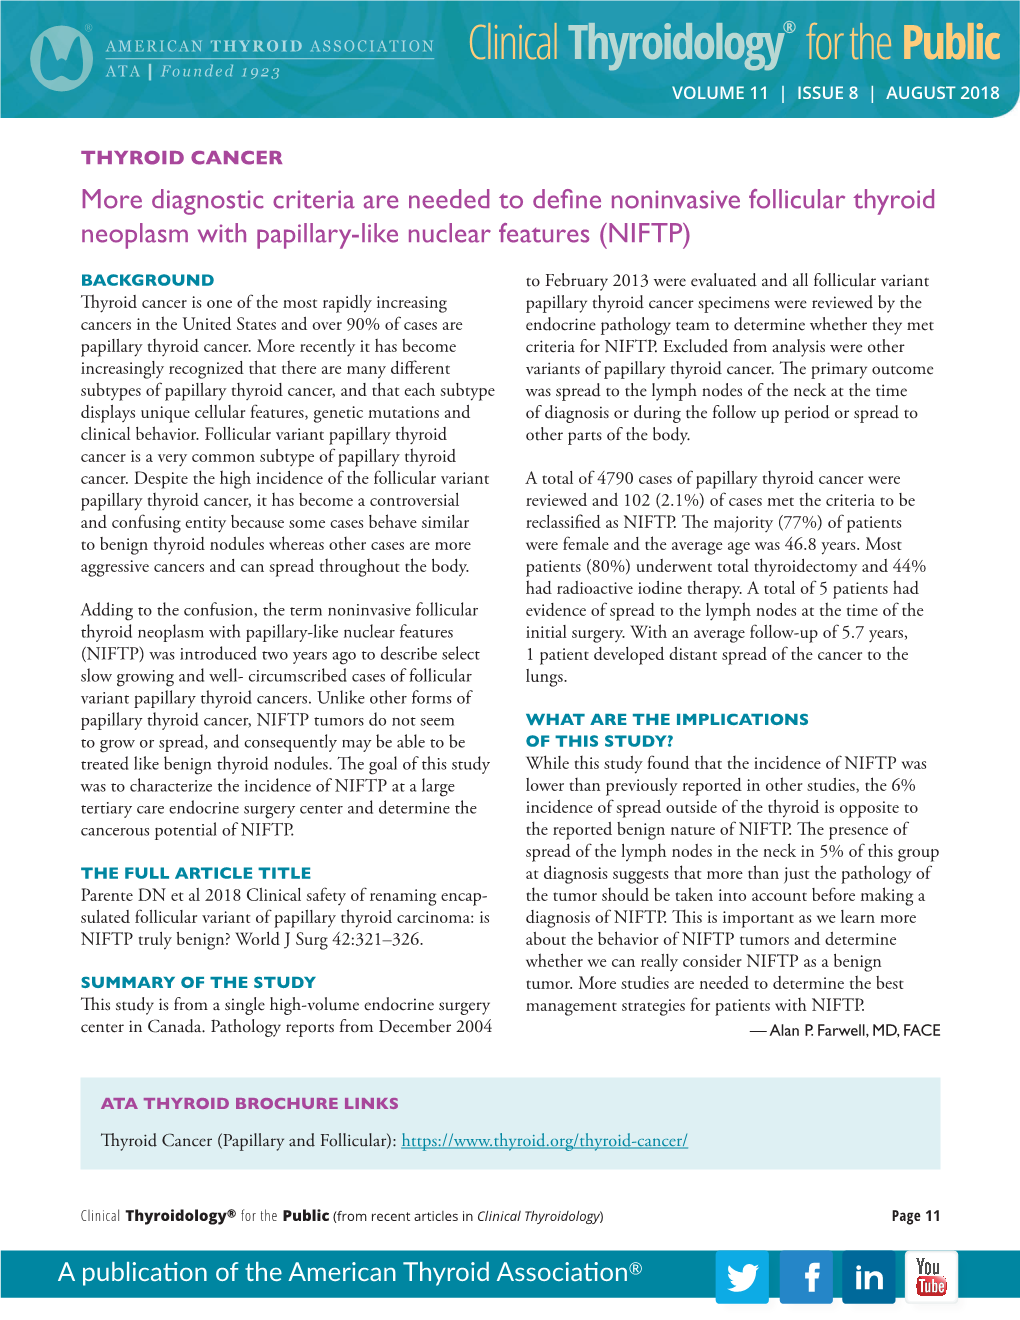 More Diagnostic Criteria Are Needed to Define Noninvasive Follicular Thyroid Neoplasm with Papillary-Like Nuclear Features (NIFTP)